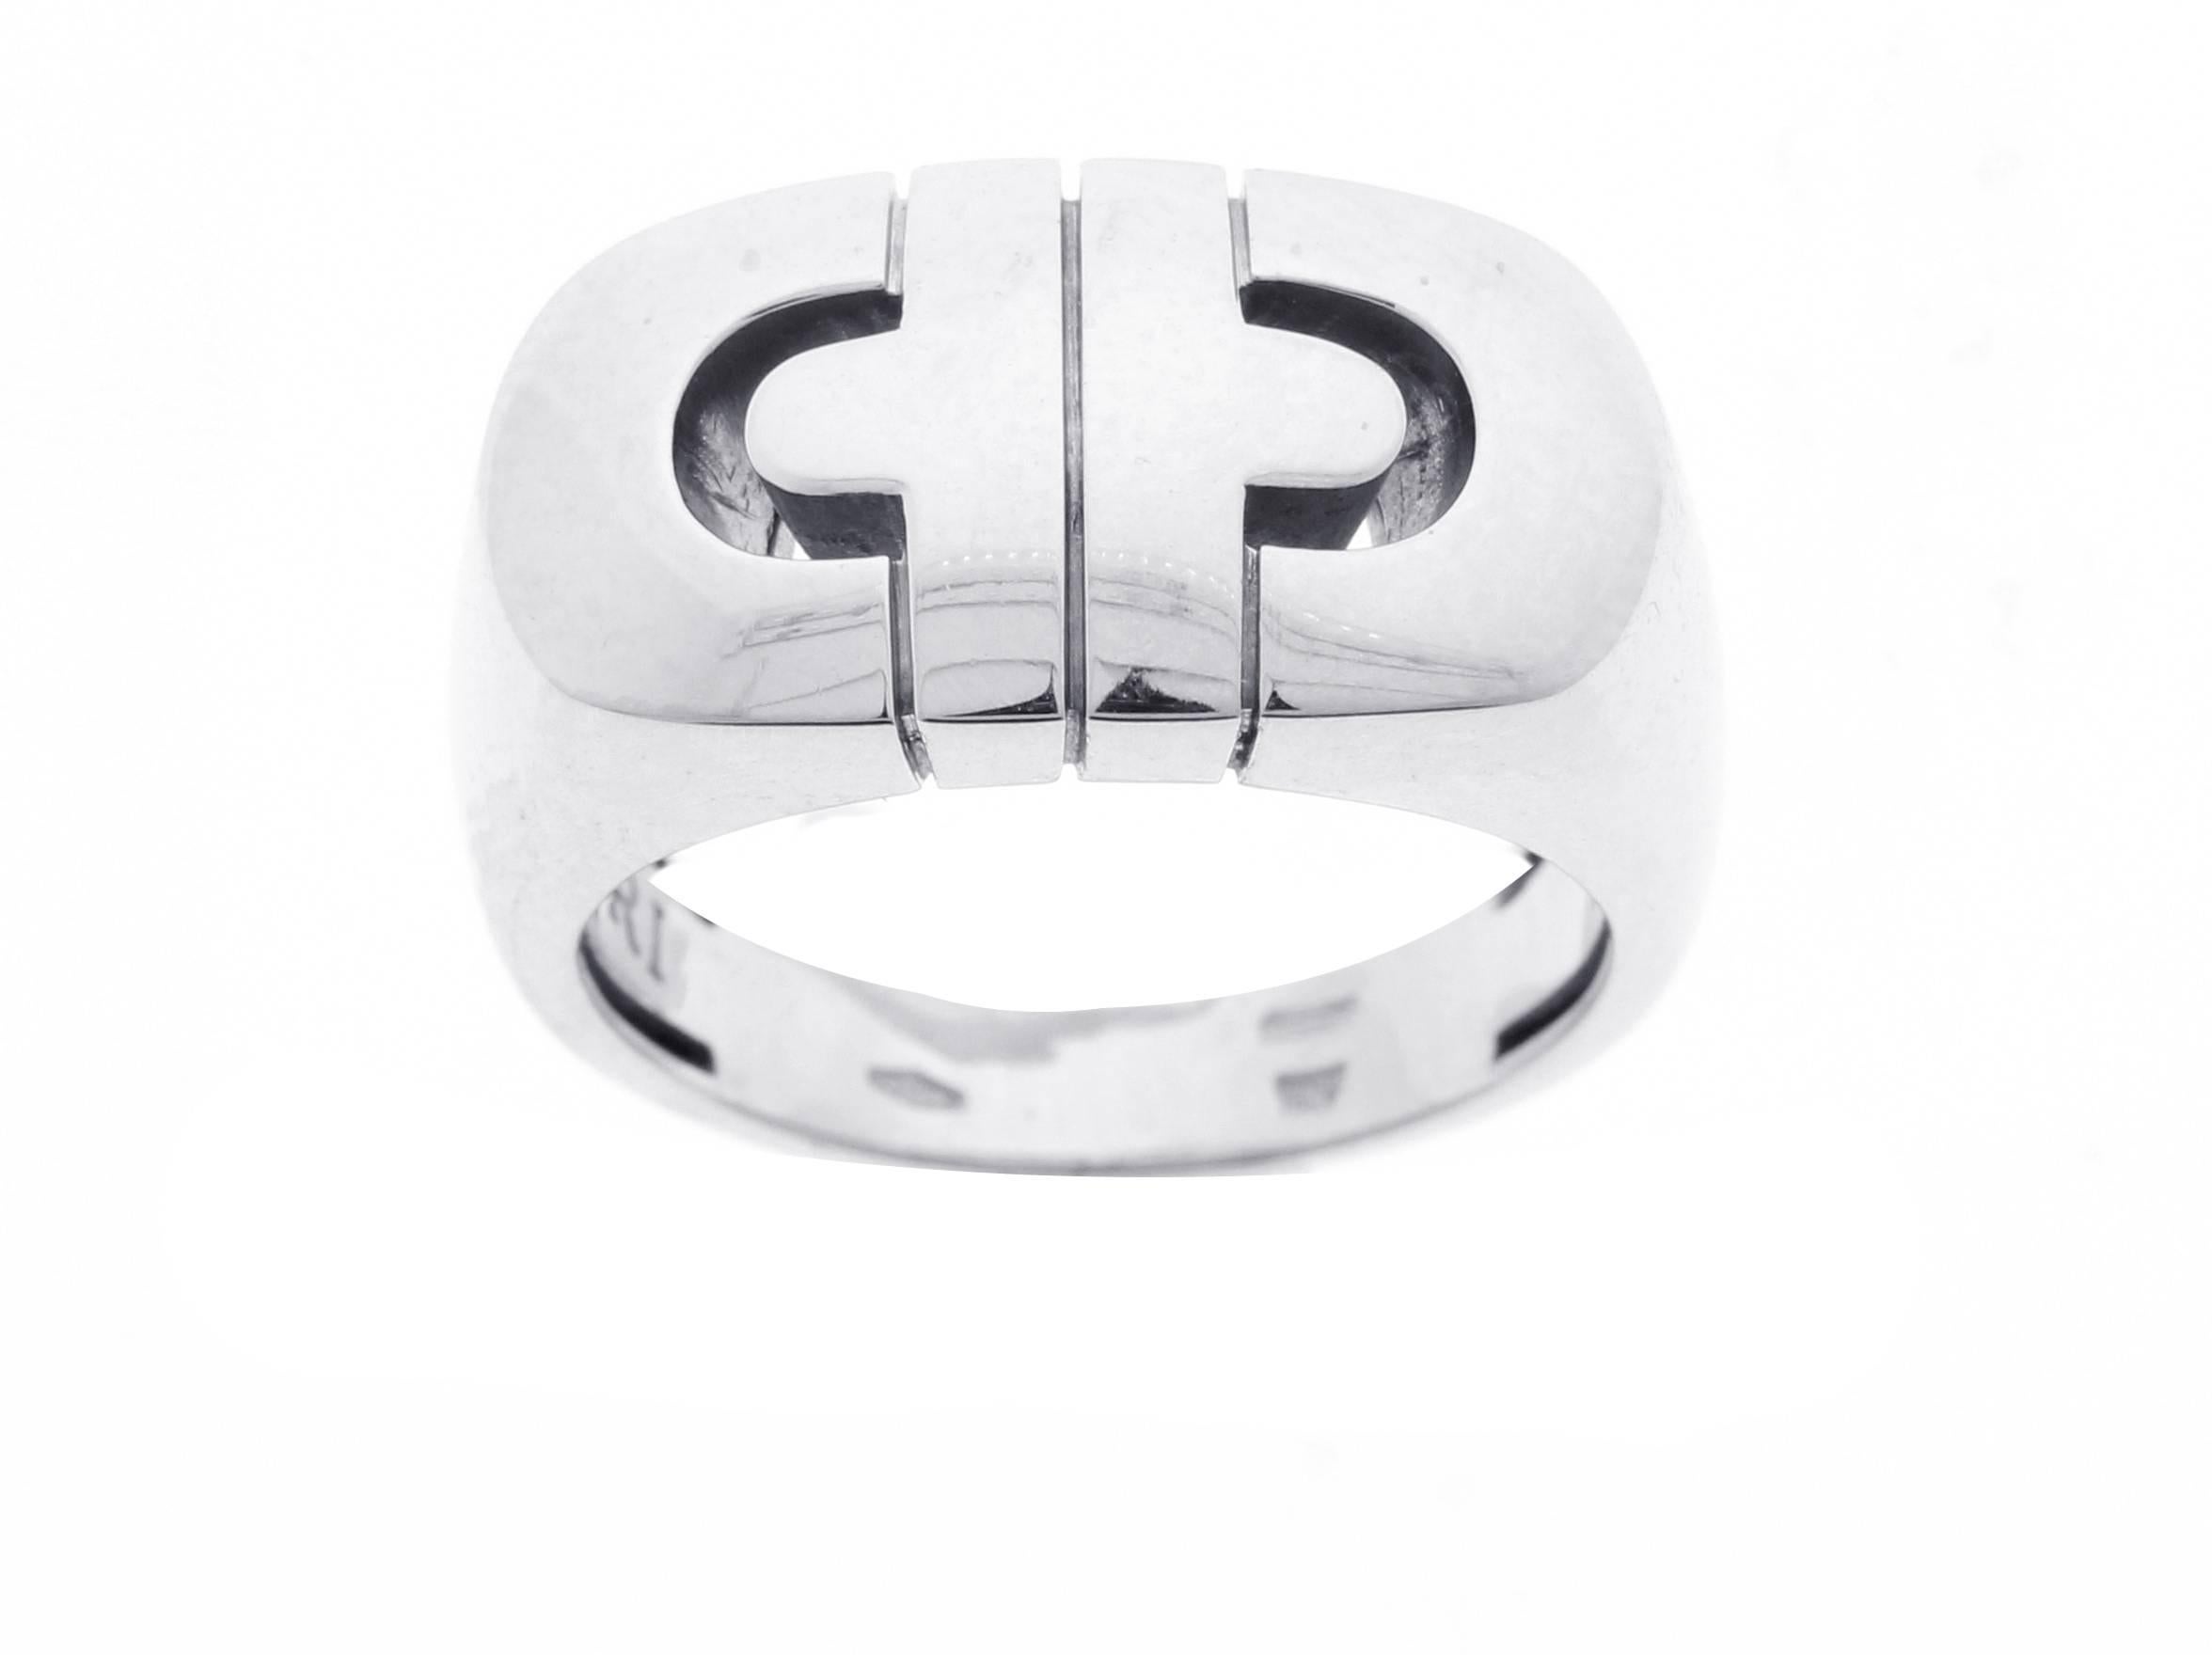 This Bulgari Parentesi ring is 18 karat white gold and features a classic Bulgari design. The ring is a size 6 and measures 10 millimeters at the widest area and tapers to 4 millimeters at the thinnest area.